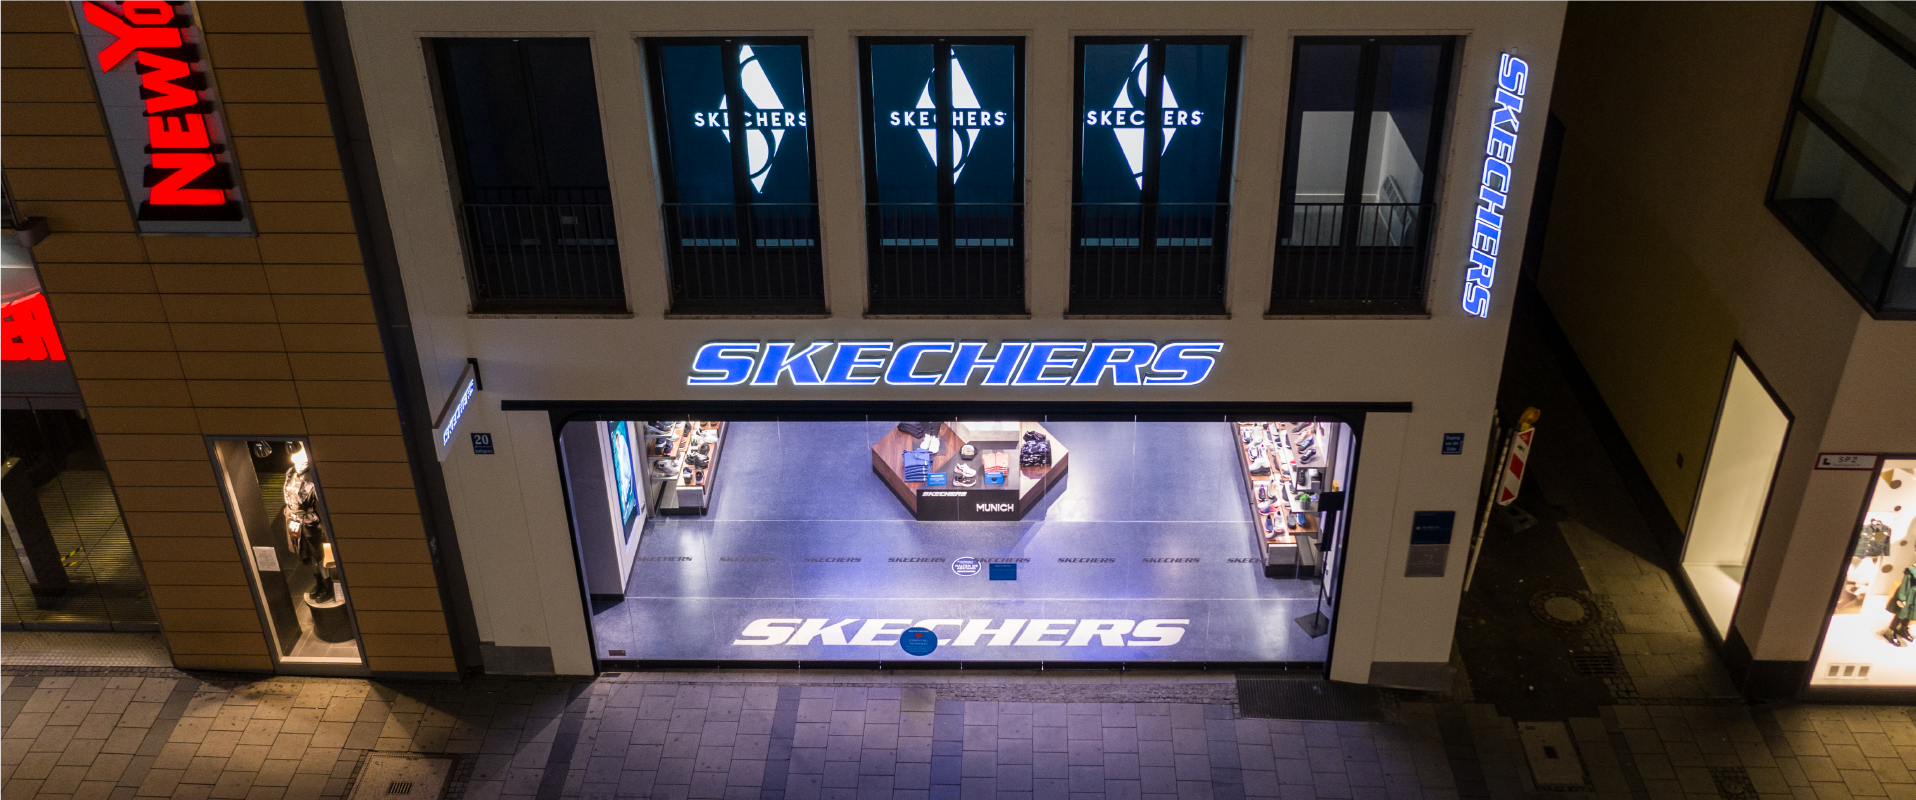 Astra Signs Case Study Skechers